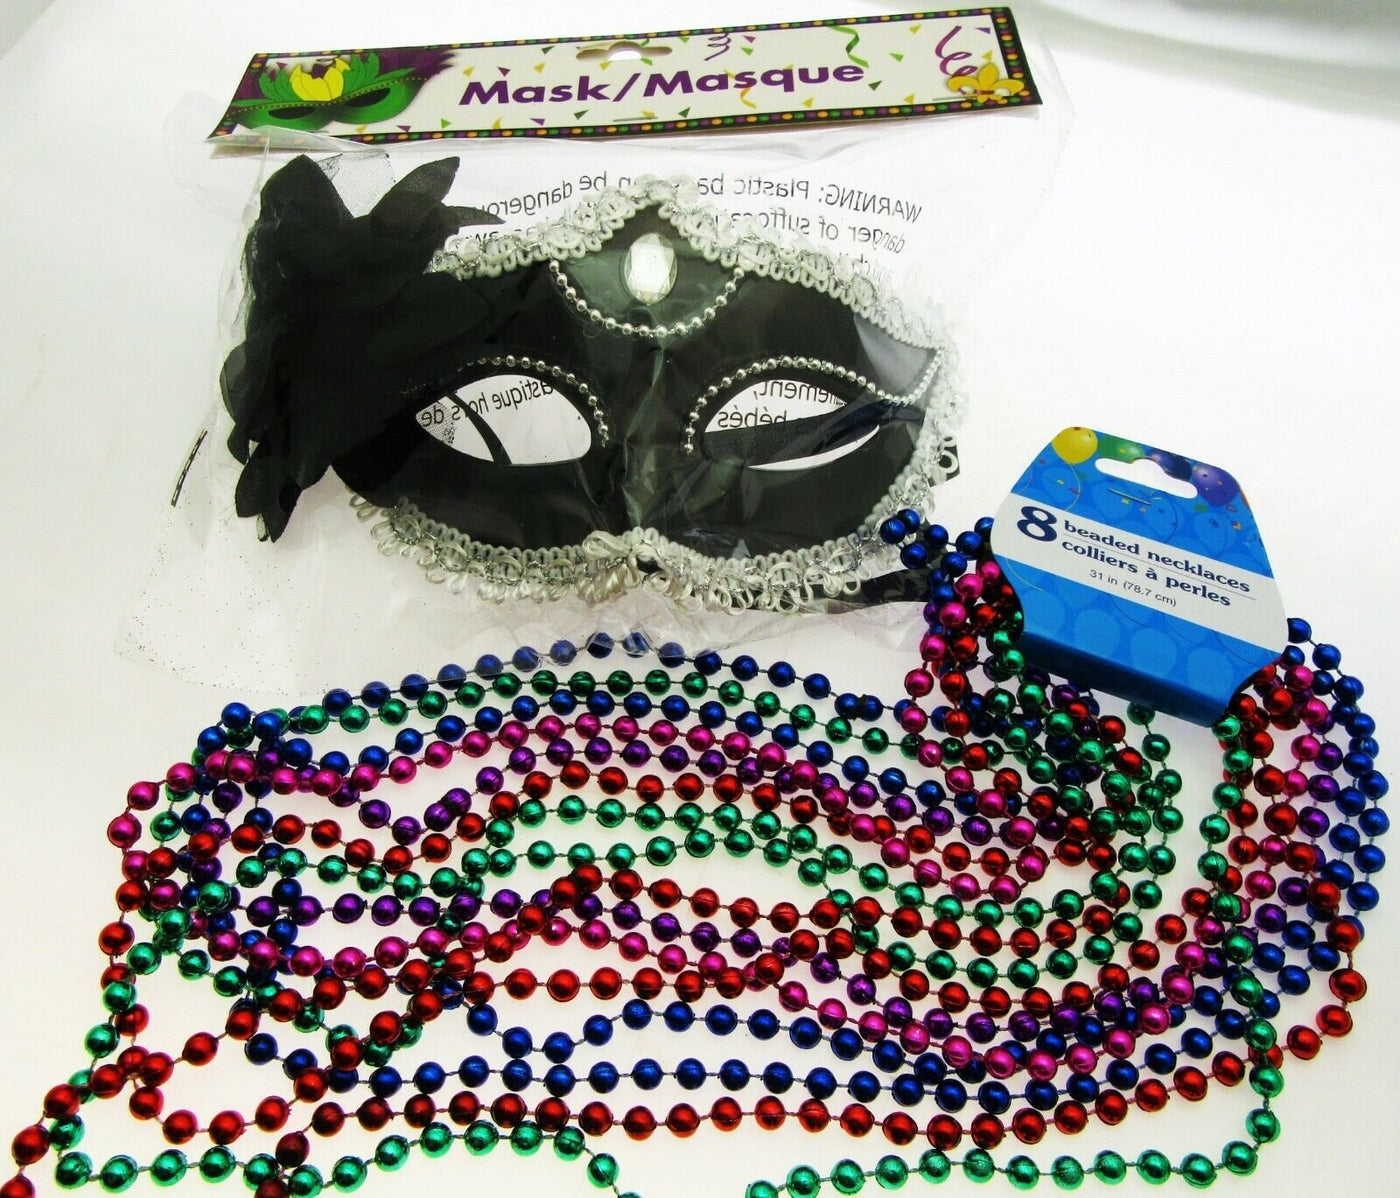 Mardi Gras Eye Mask & Necklaces Costume Mascaraed Parade New Orleans Blac Party